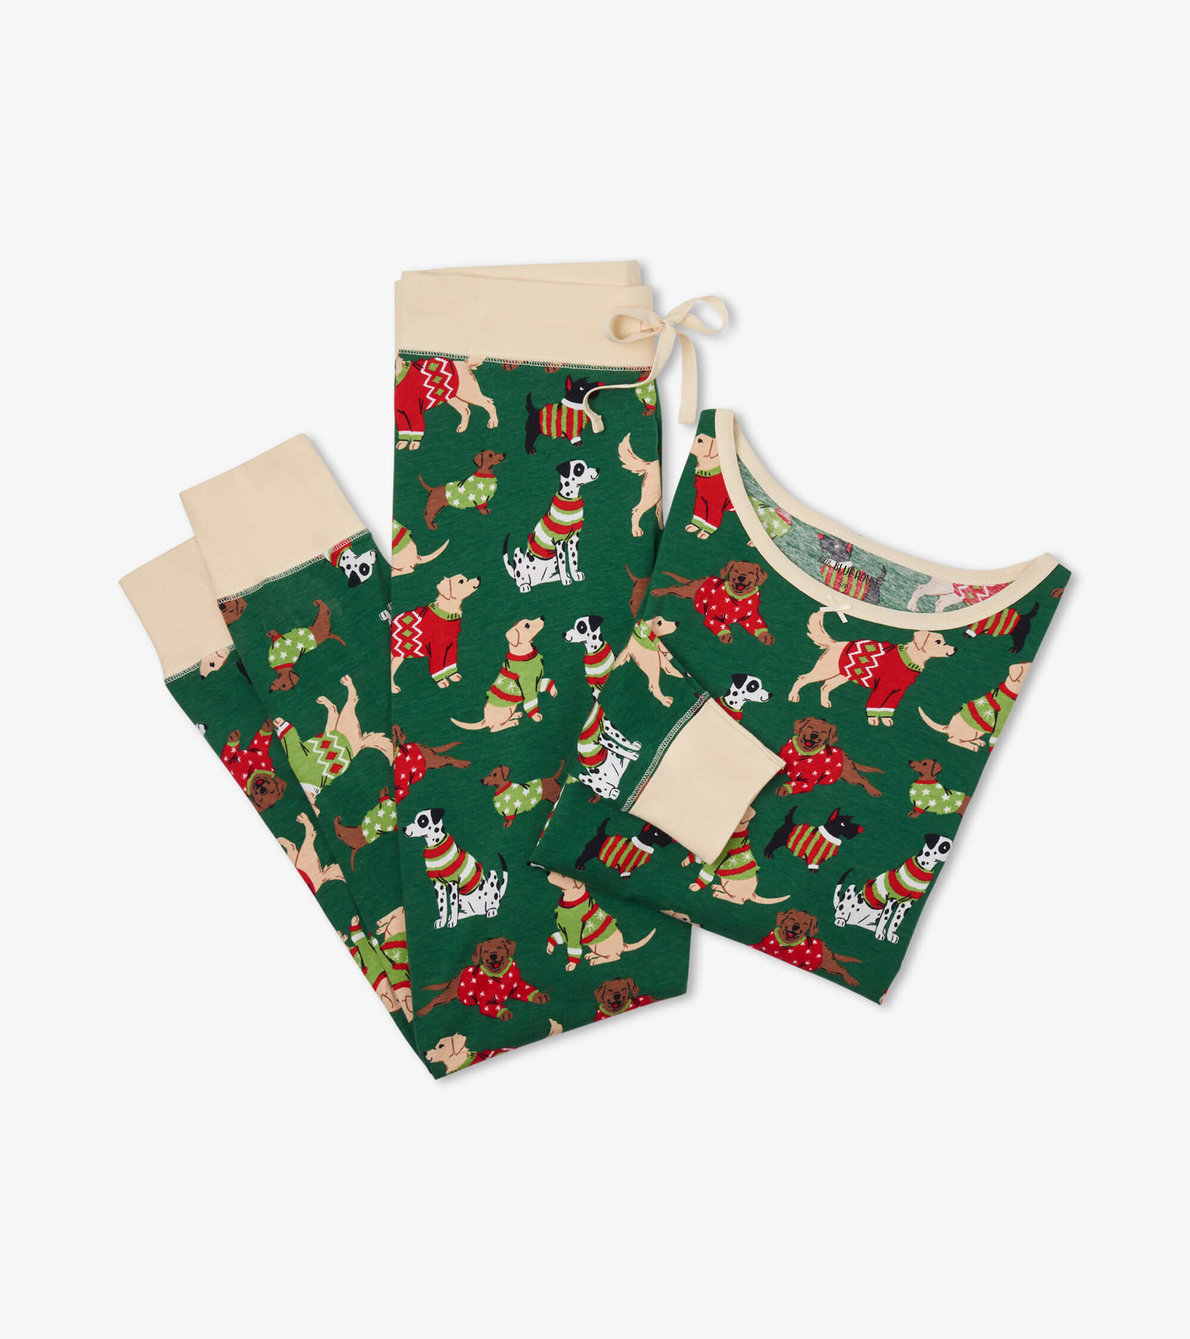 View larger image of Women's Woofing Christmas Jersey Pajama Set